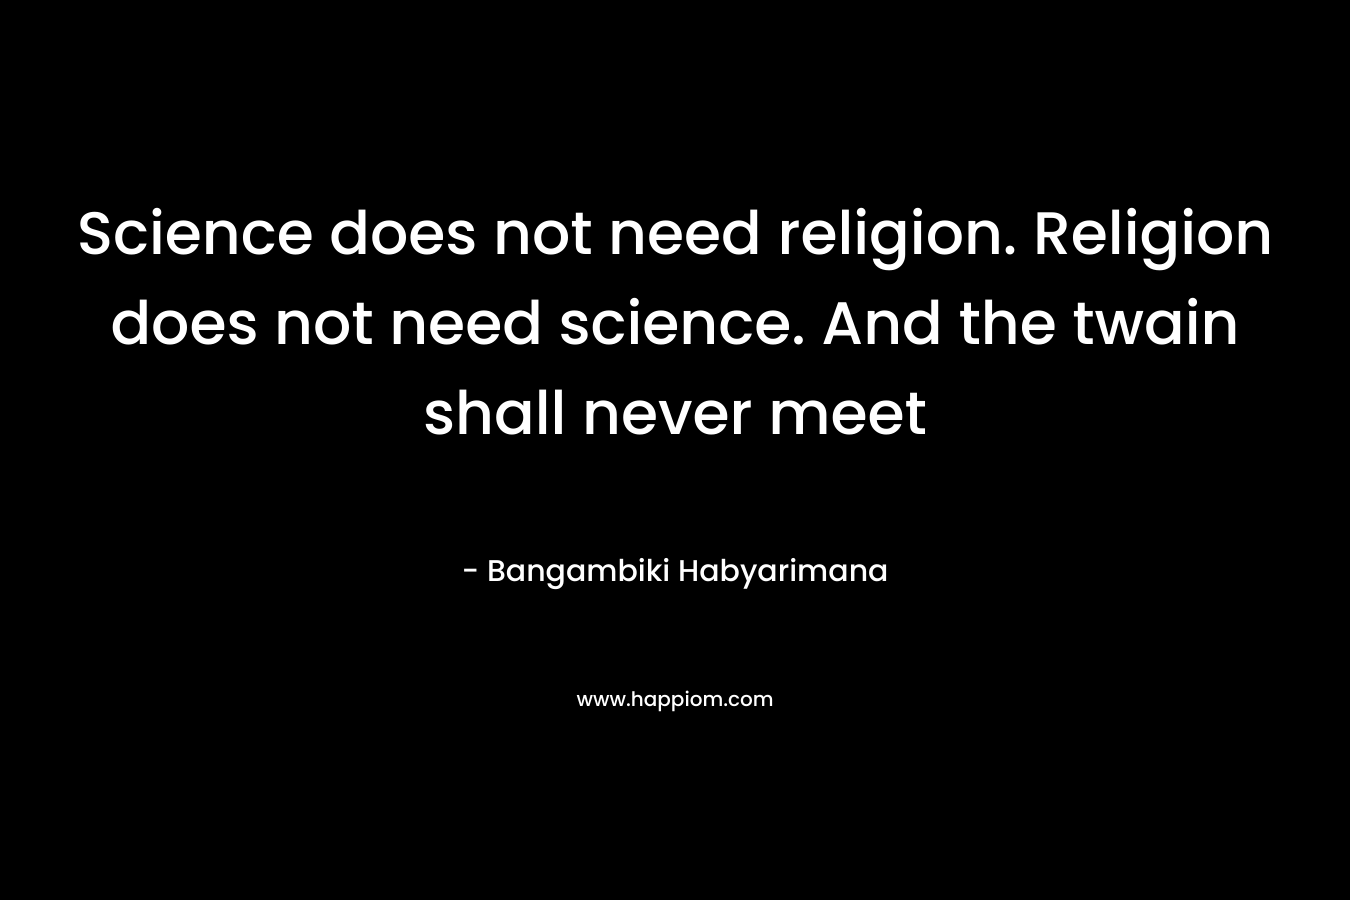 Science does not need religion. Religion does not need science. And the twain shall never meet